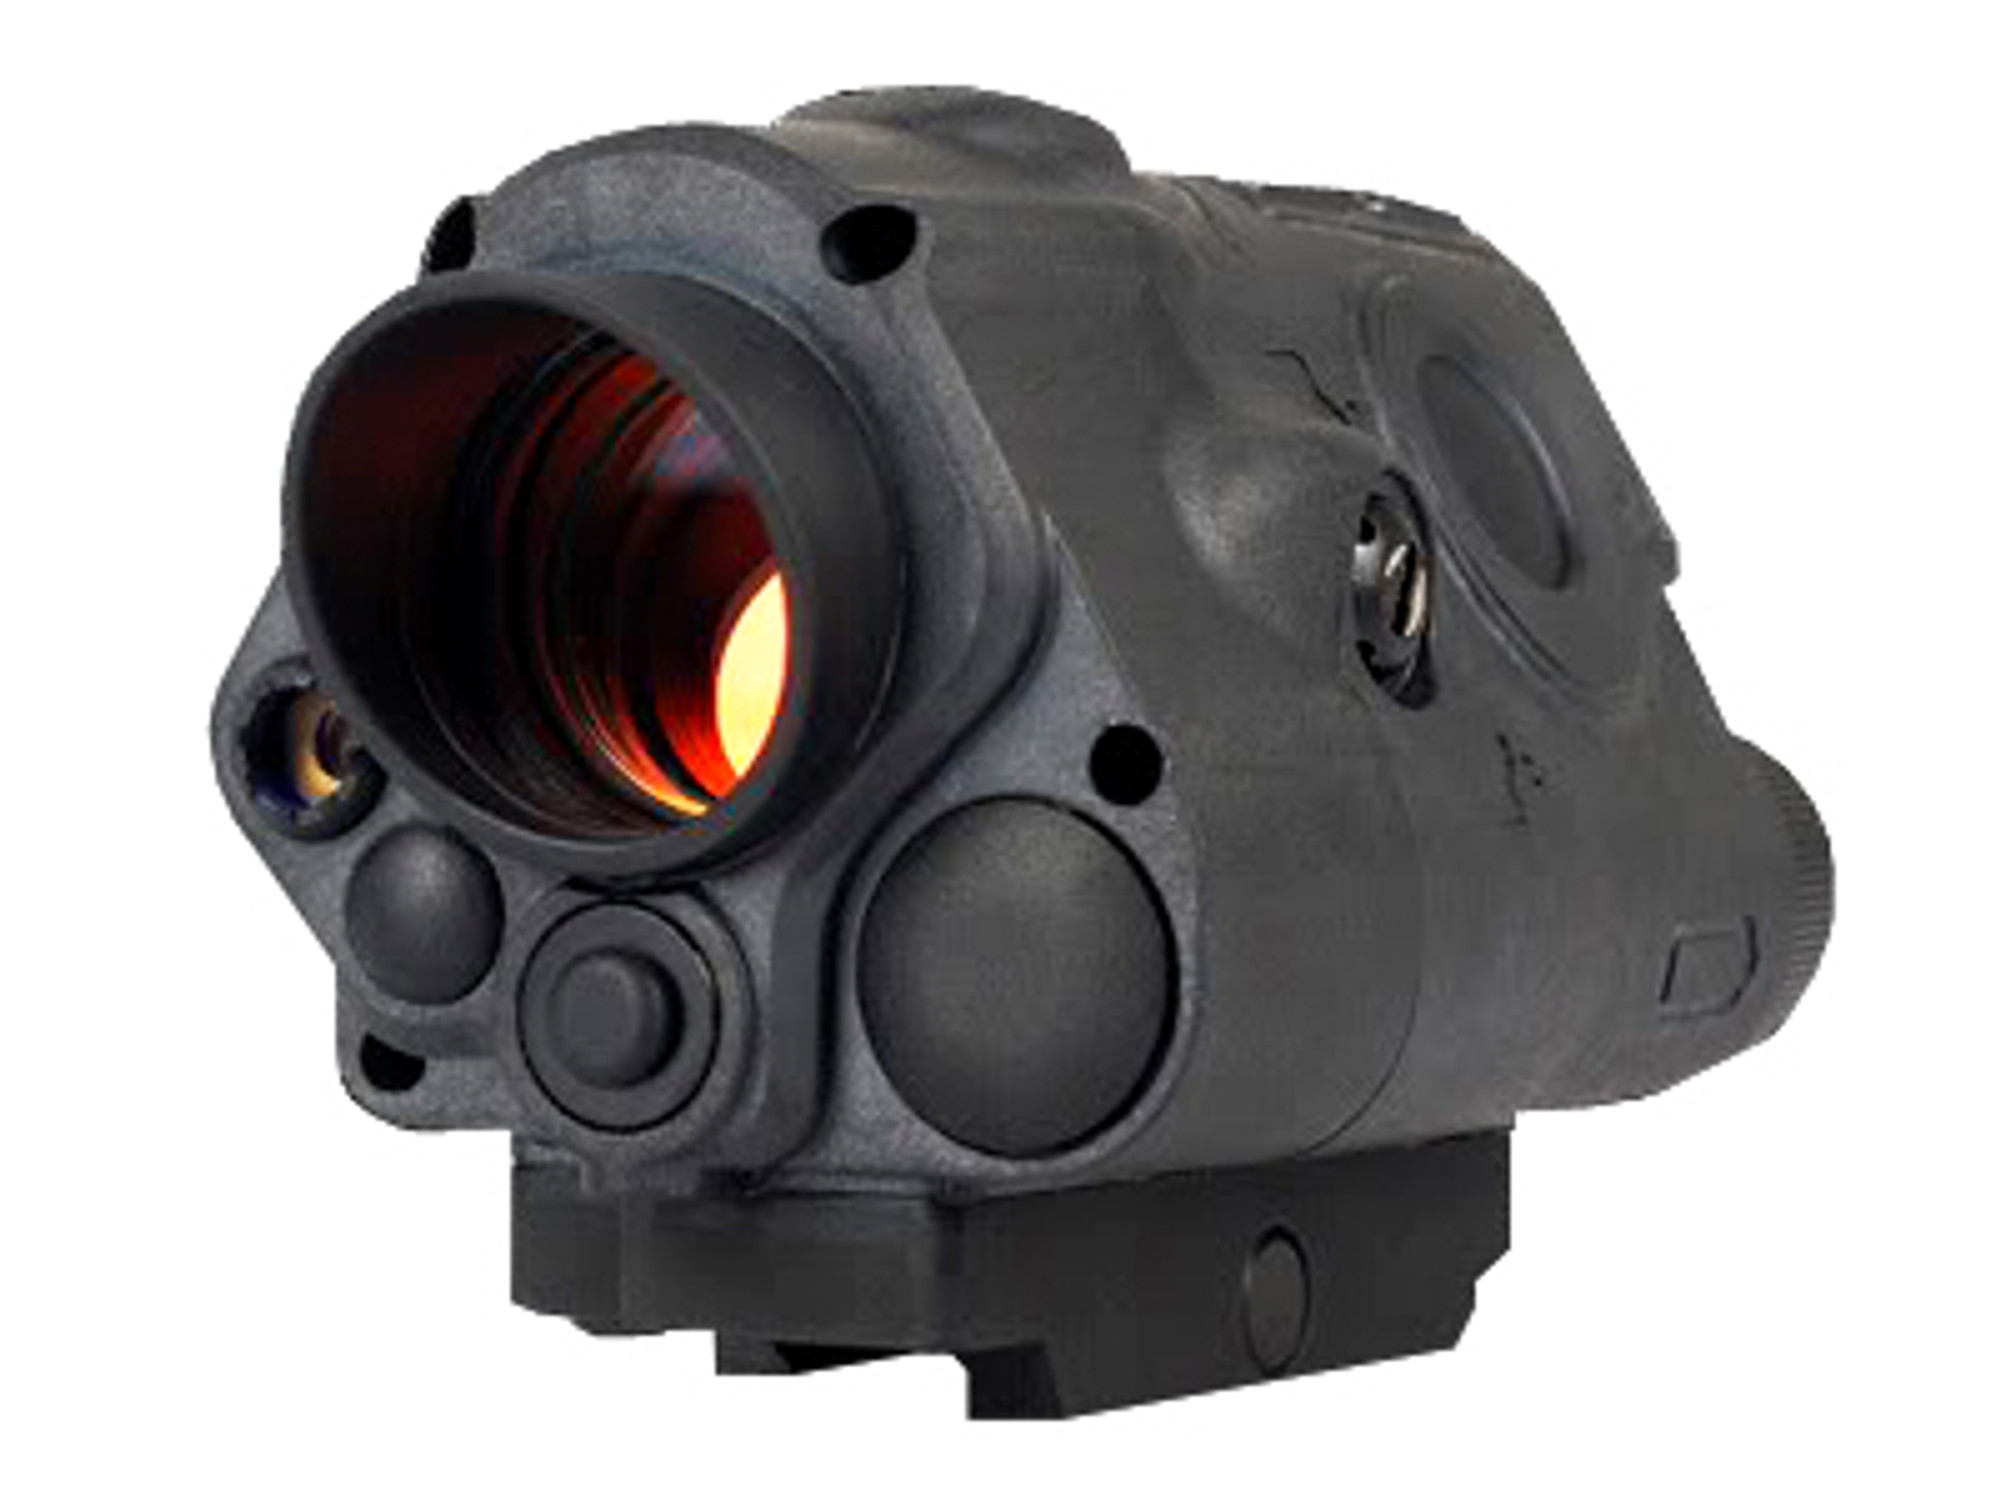 Element Z010 Integrated Red Dot w/ Visible Green and Red Laser Sight for Airsoft